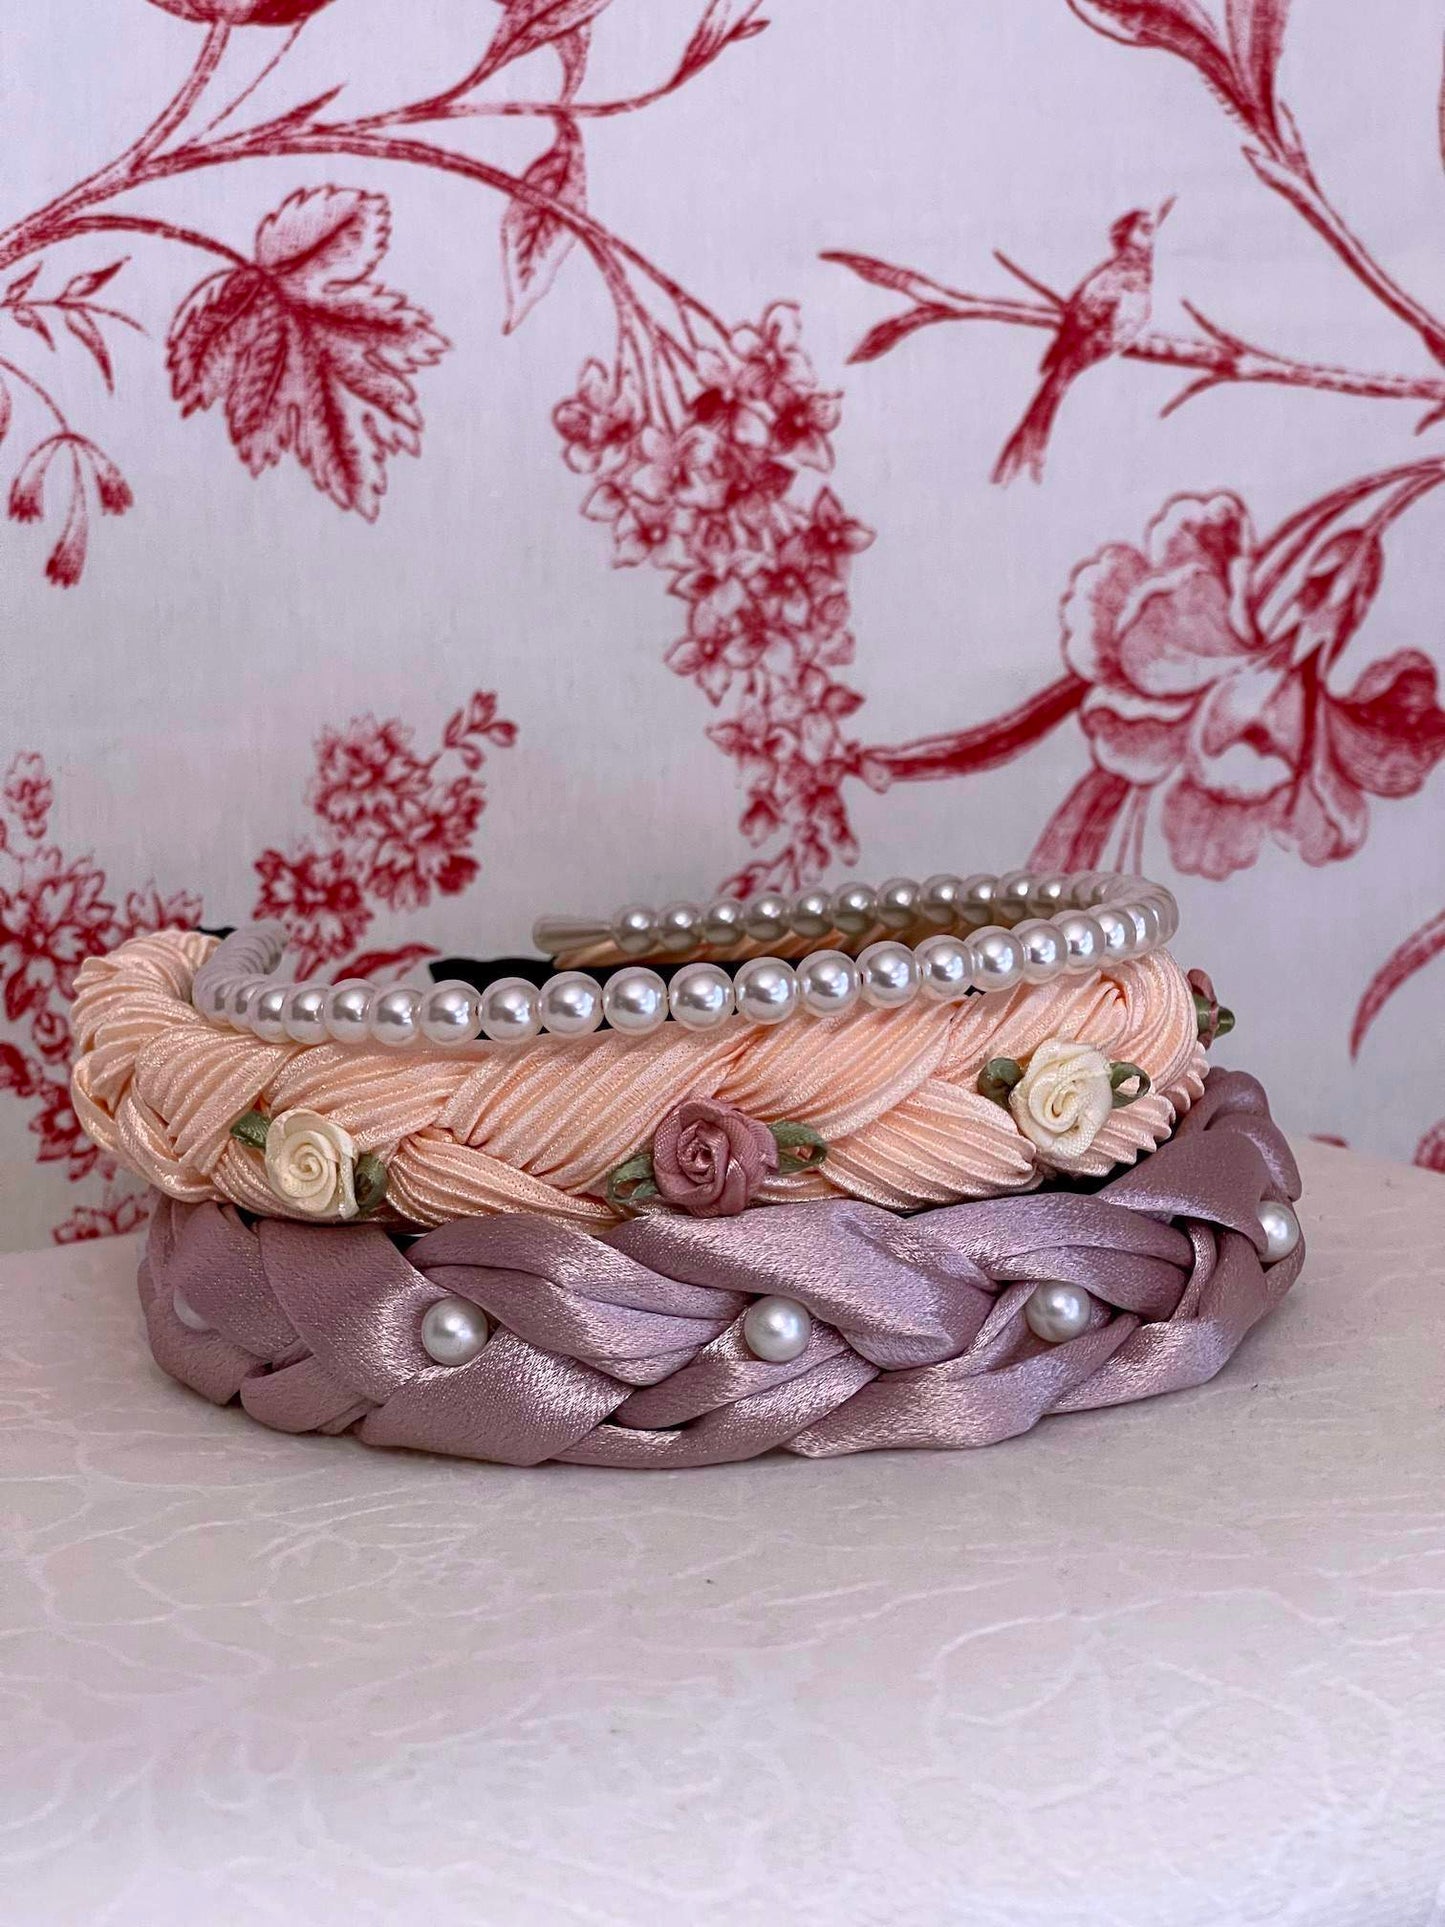 A Historically Inspired Braided Chiffon Rosette Headband in Ballerina Pink with two other pearl satin headbands, perfect for rococo and regency era fashion.